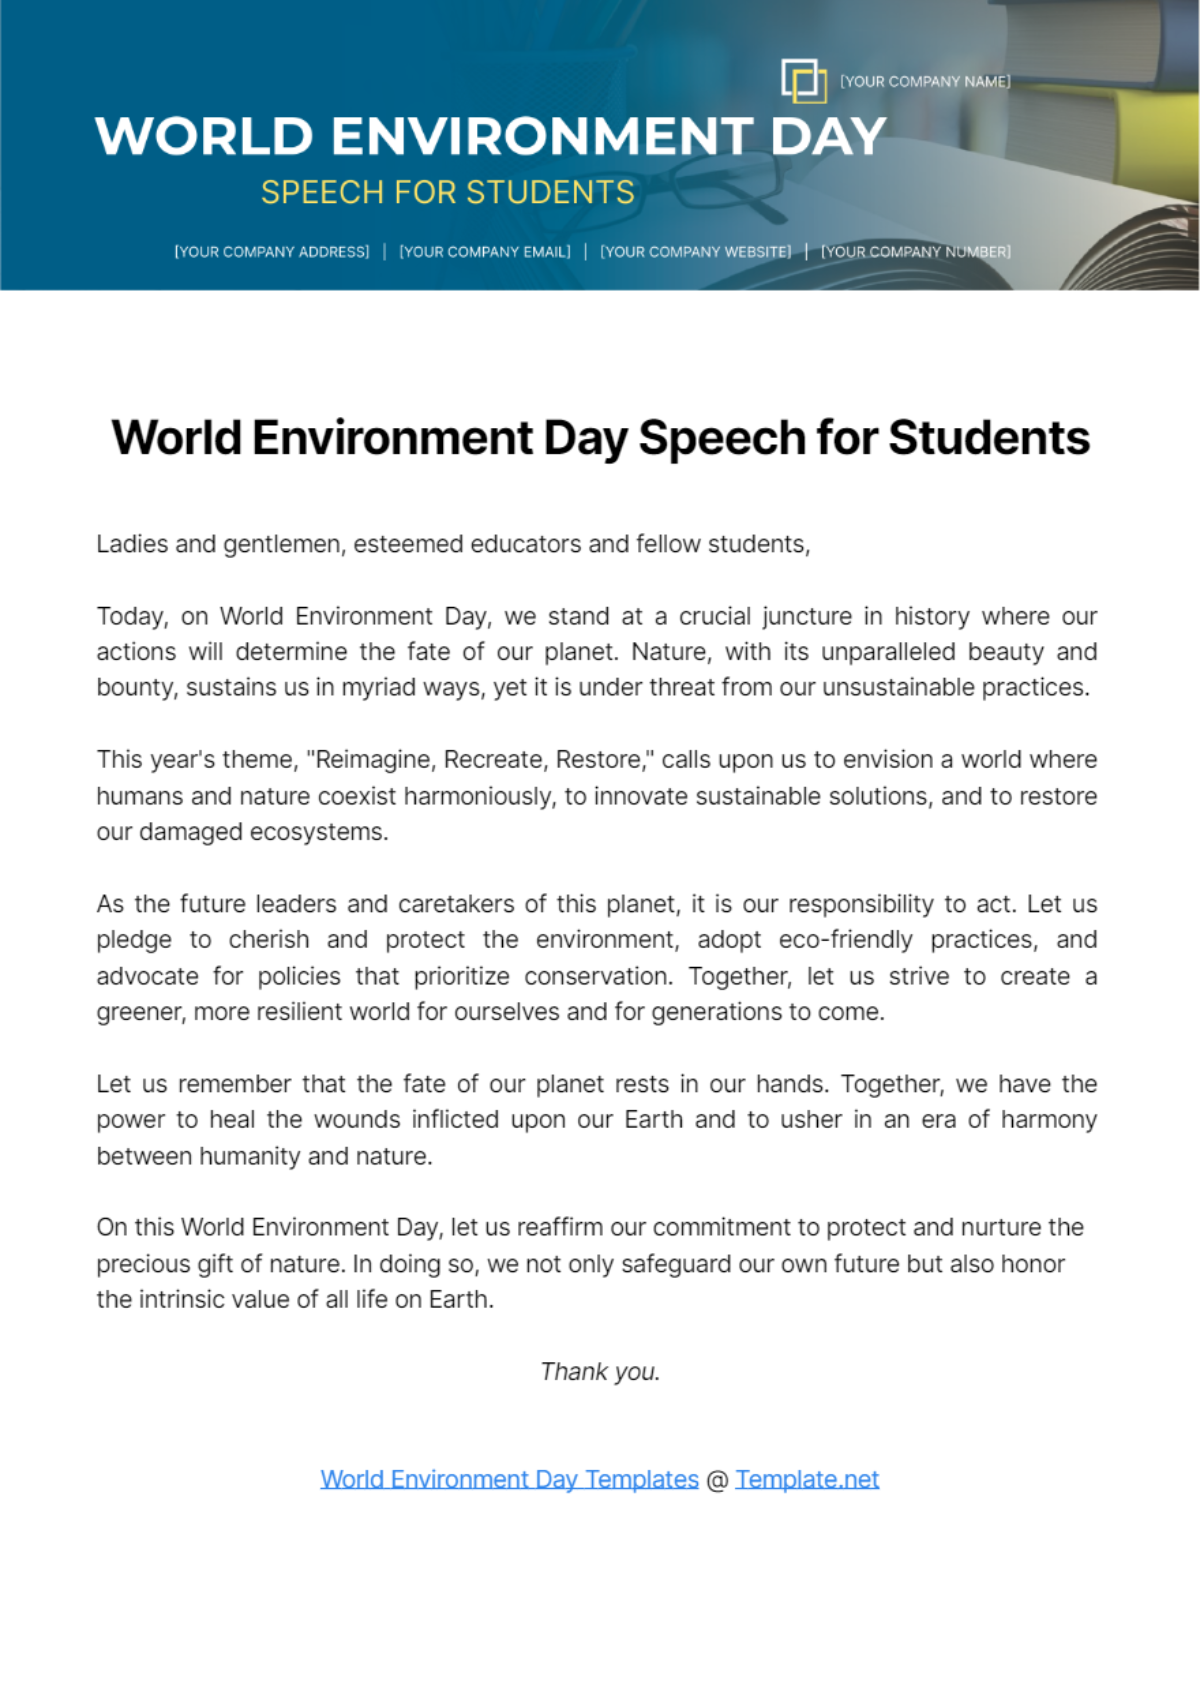 Free World Environment Day Speech for Students Template